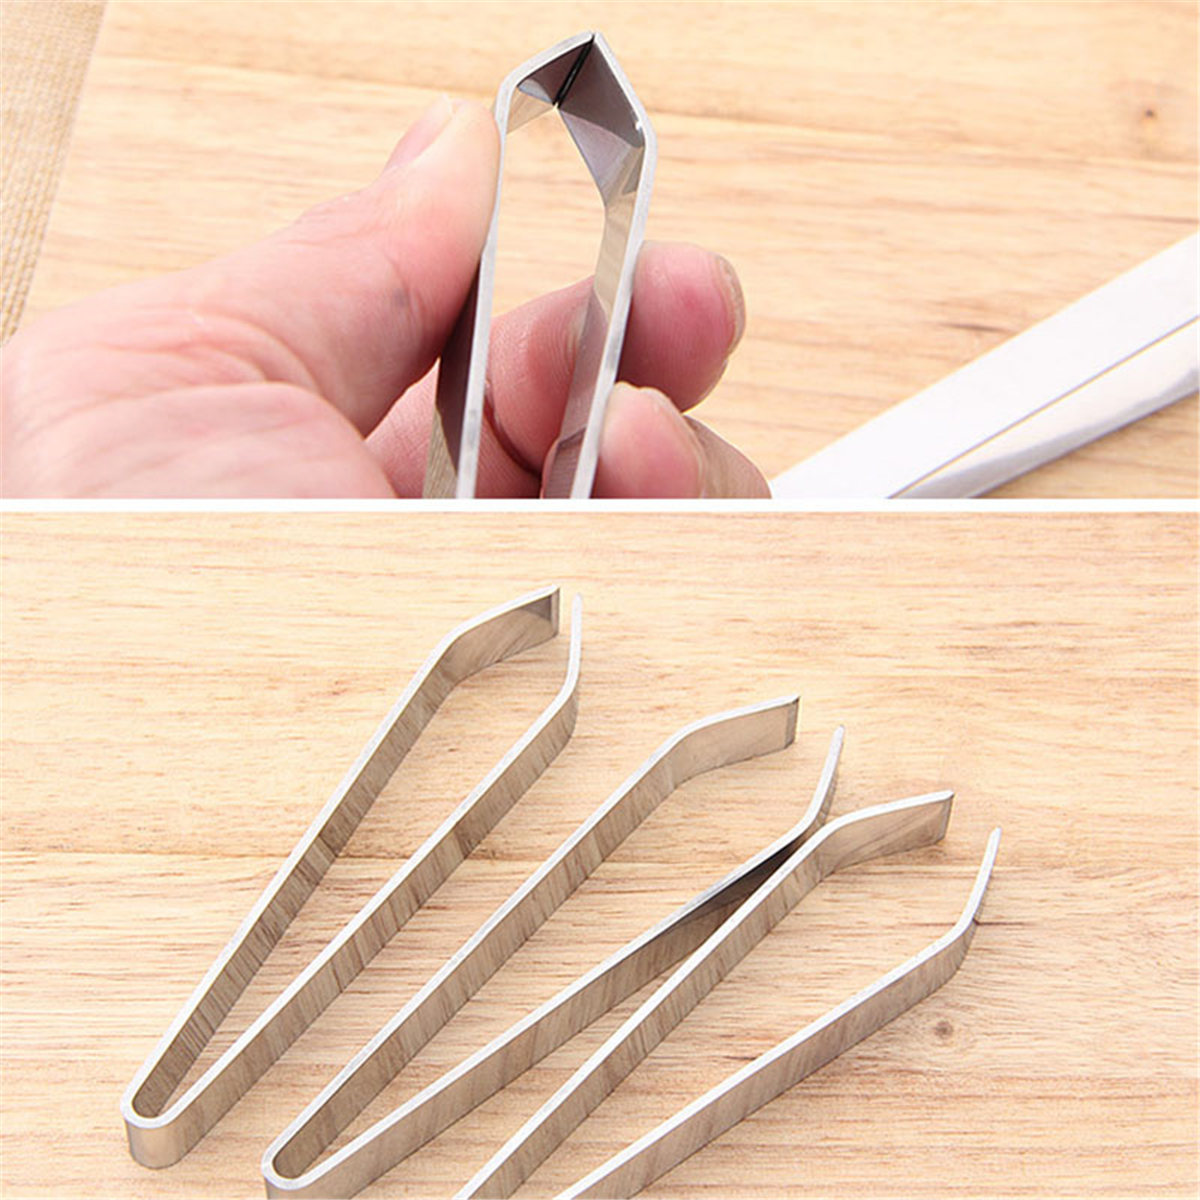 High Quality Stainless Steel Fish Bone Tweezers Remover Pincer Puller Tongs Pick-Up Seafood Tool Economic Crafts